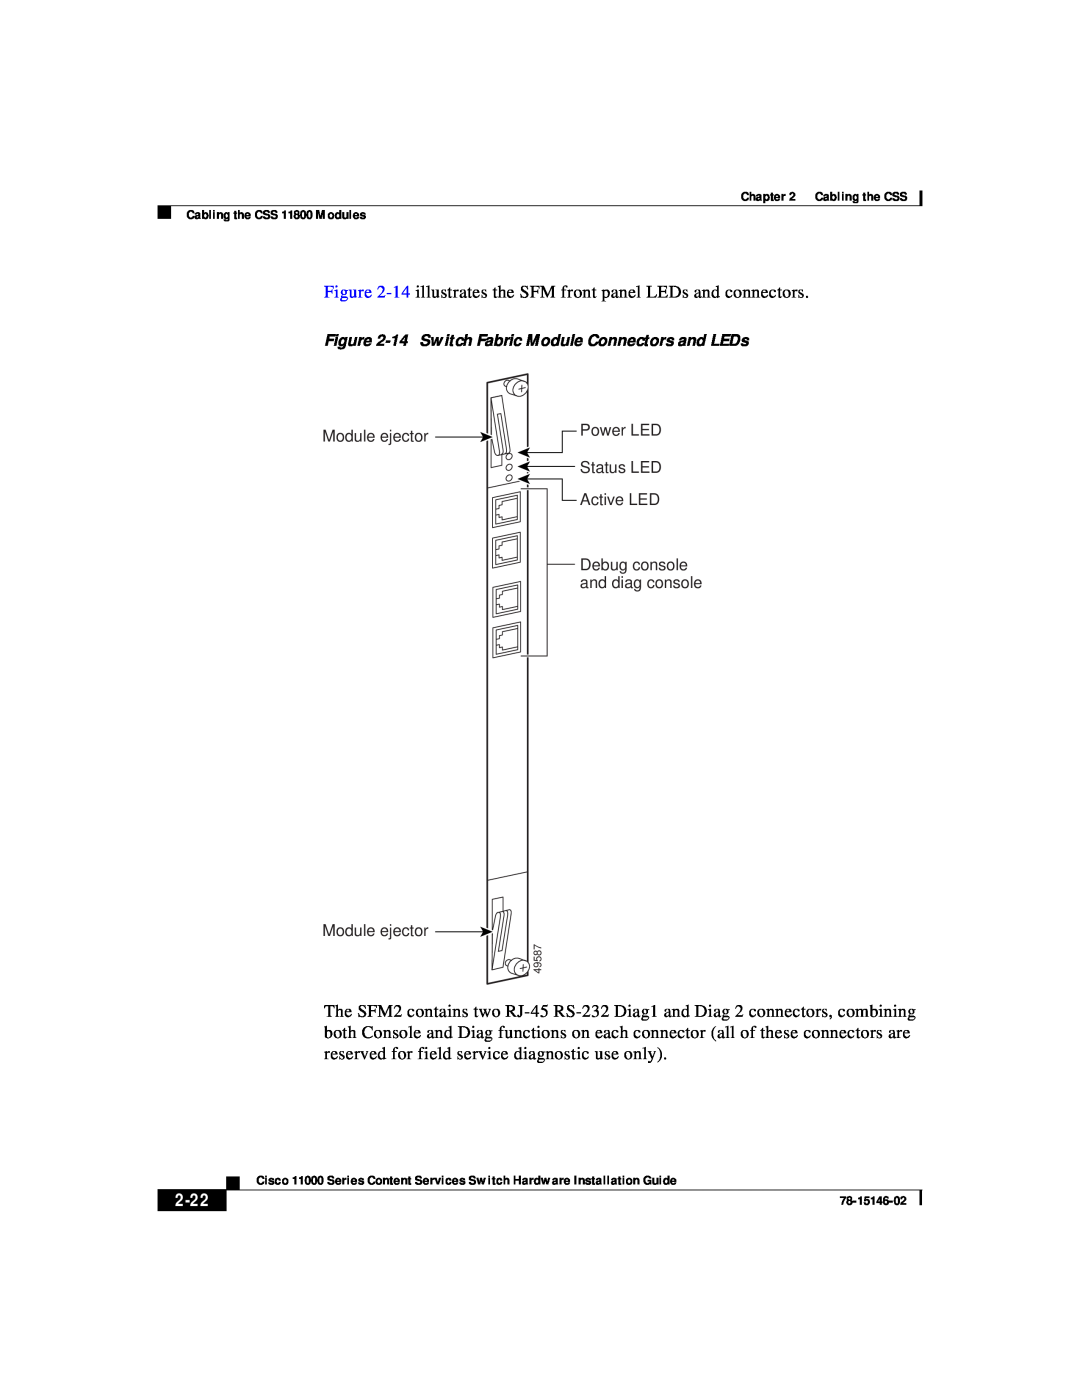 Cisco Systems 11000 Series manual 14 illustrates the SFM front panel LEDs and connectors, 2-22 